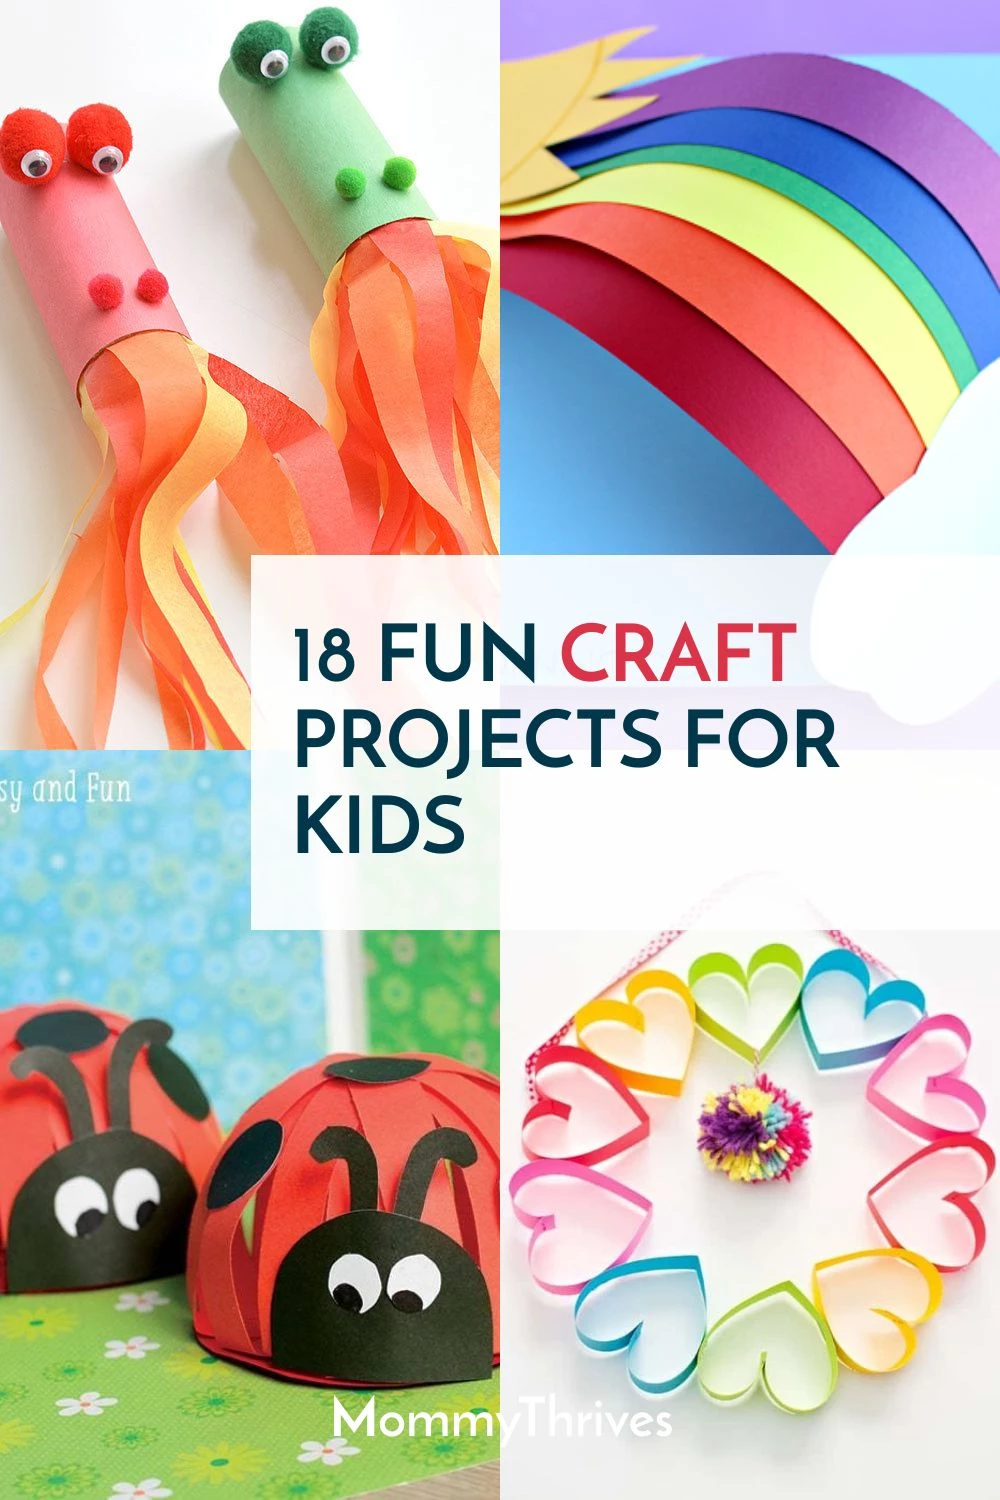 Arts & Crafts for Kids: Projects & Ideas